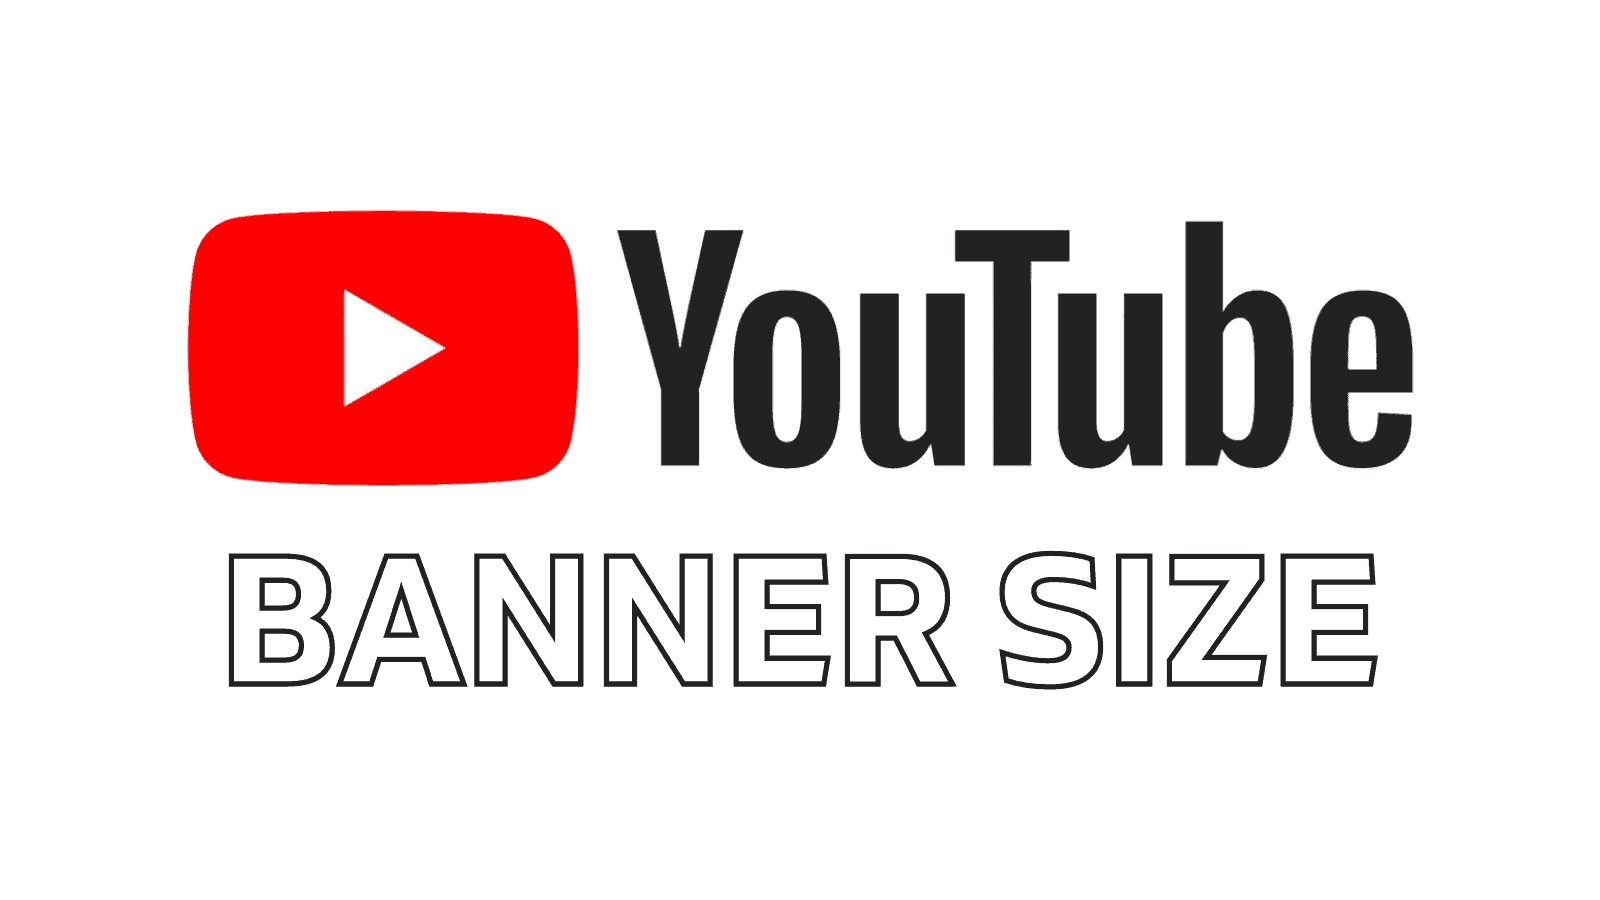 What is the Best YouTube Profile Picture Size With Examples